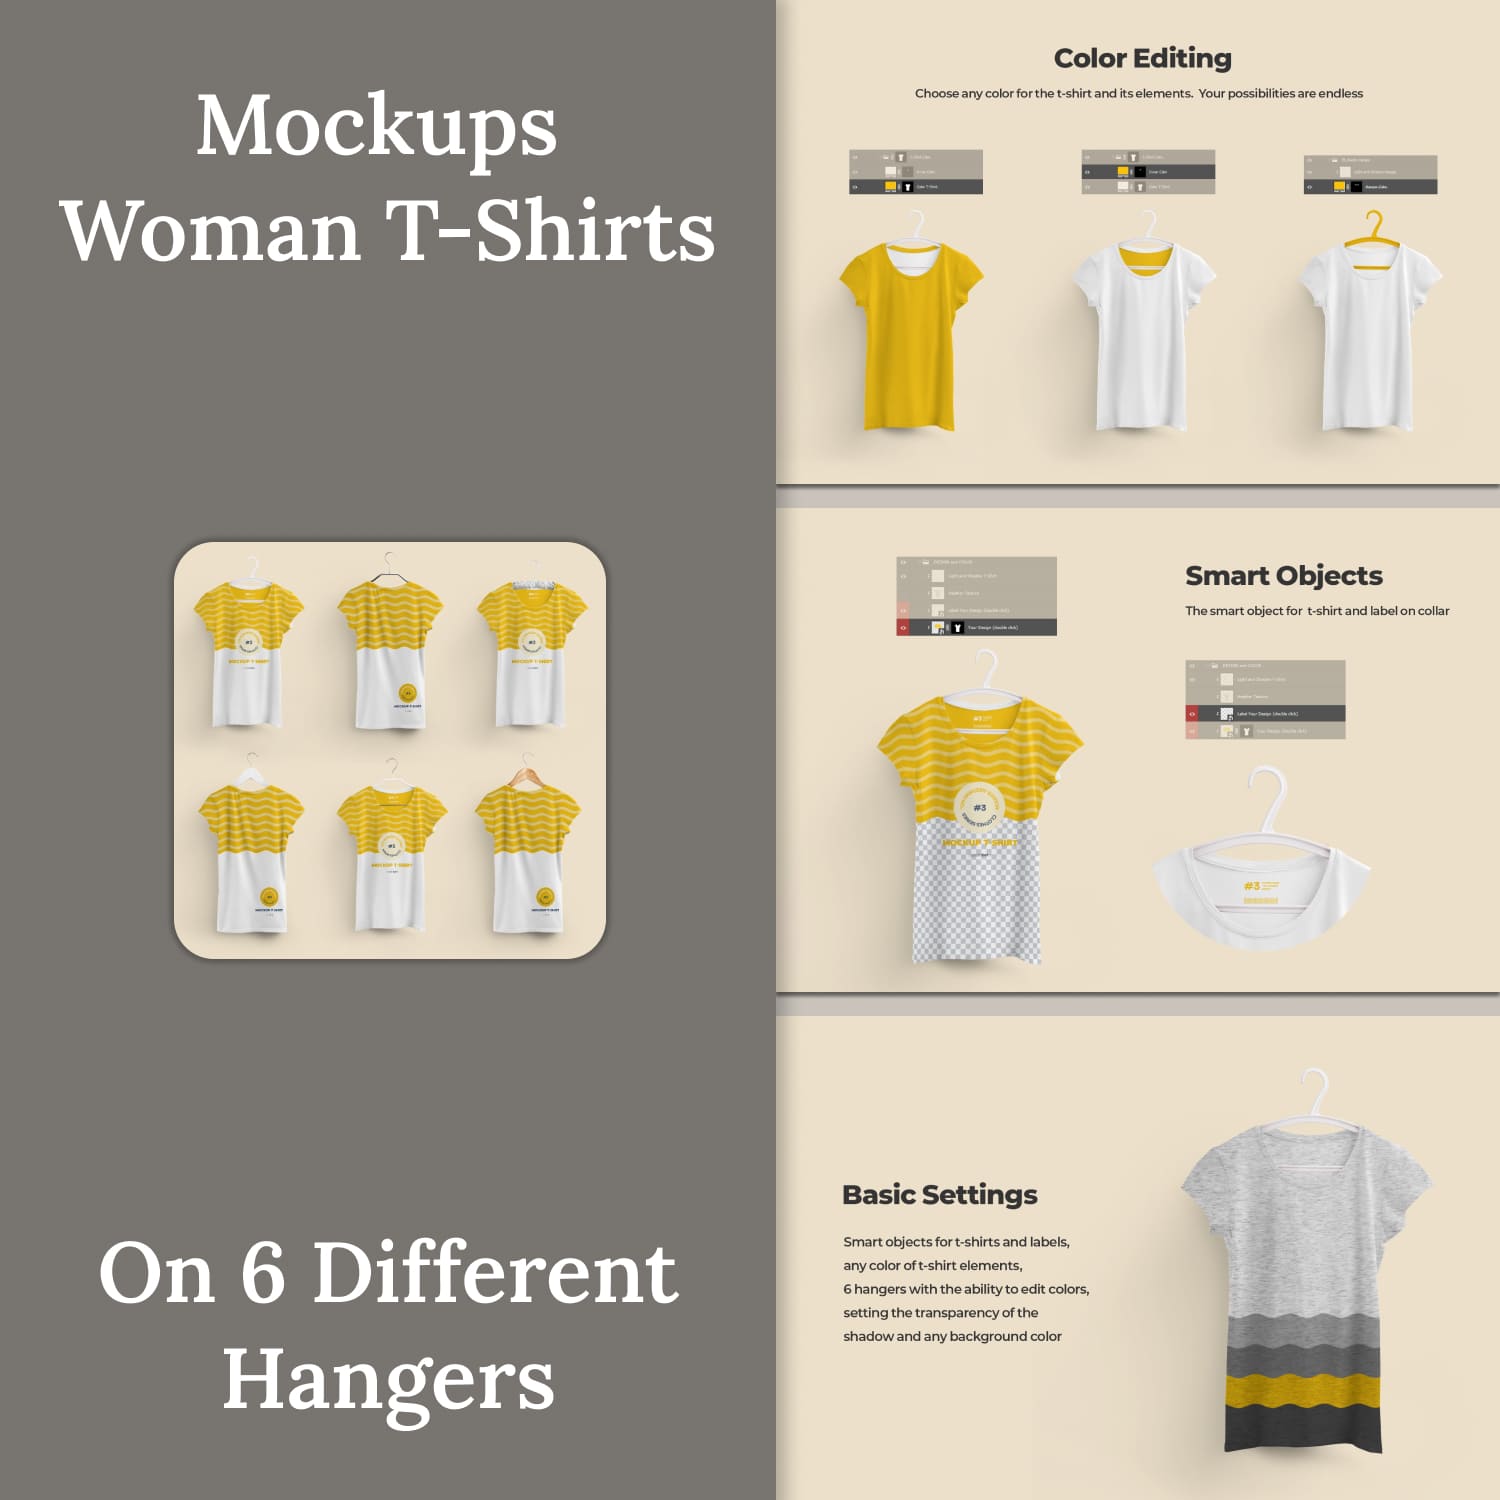 2 Mockups Woman T-shirts On 6 Different Hangers cover.